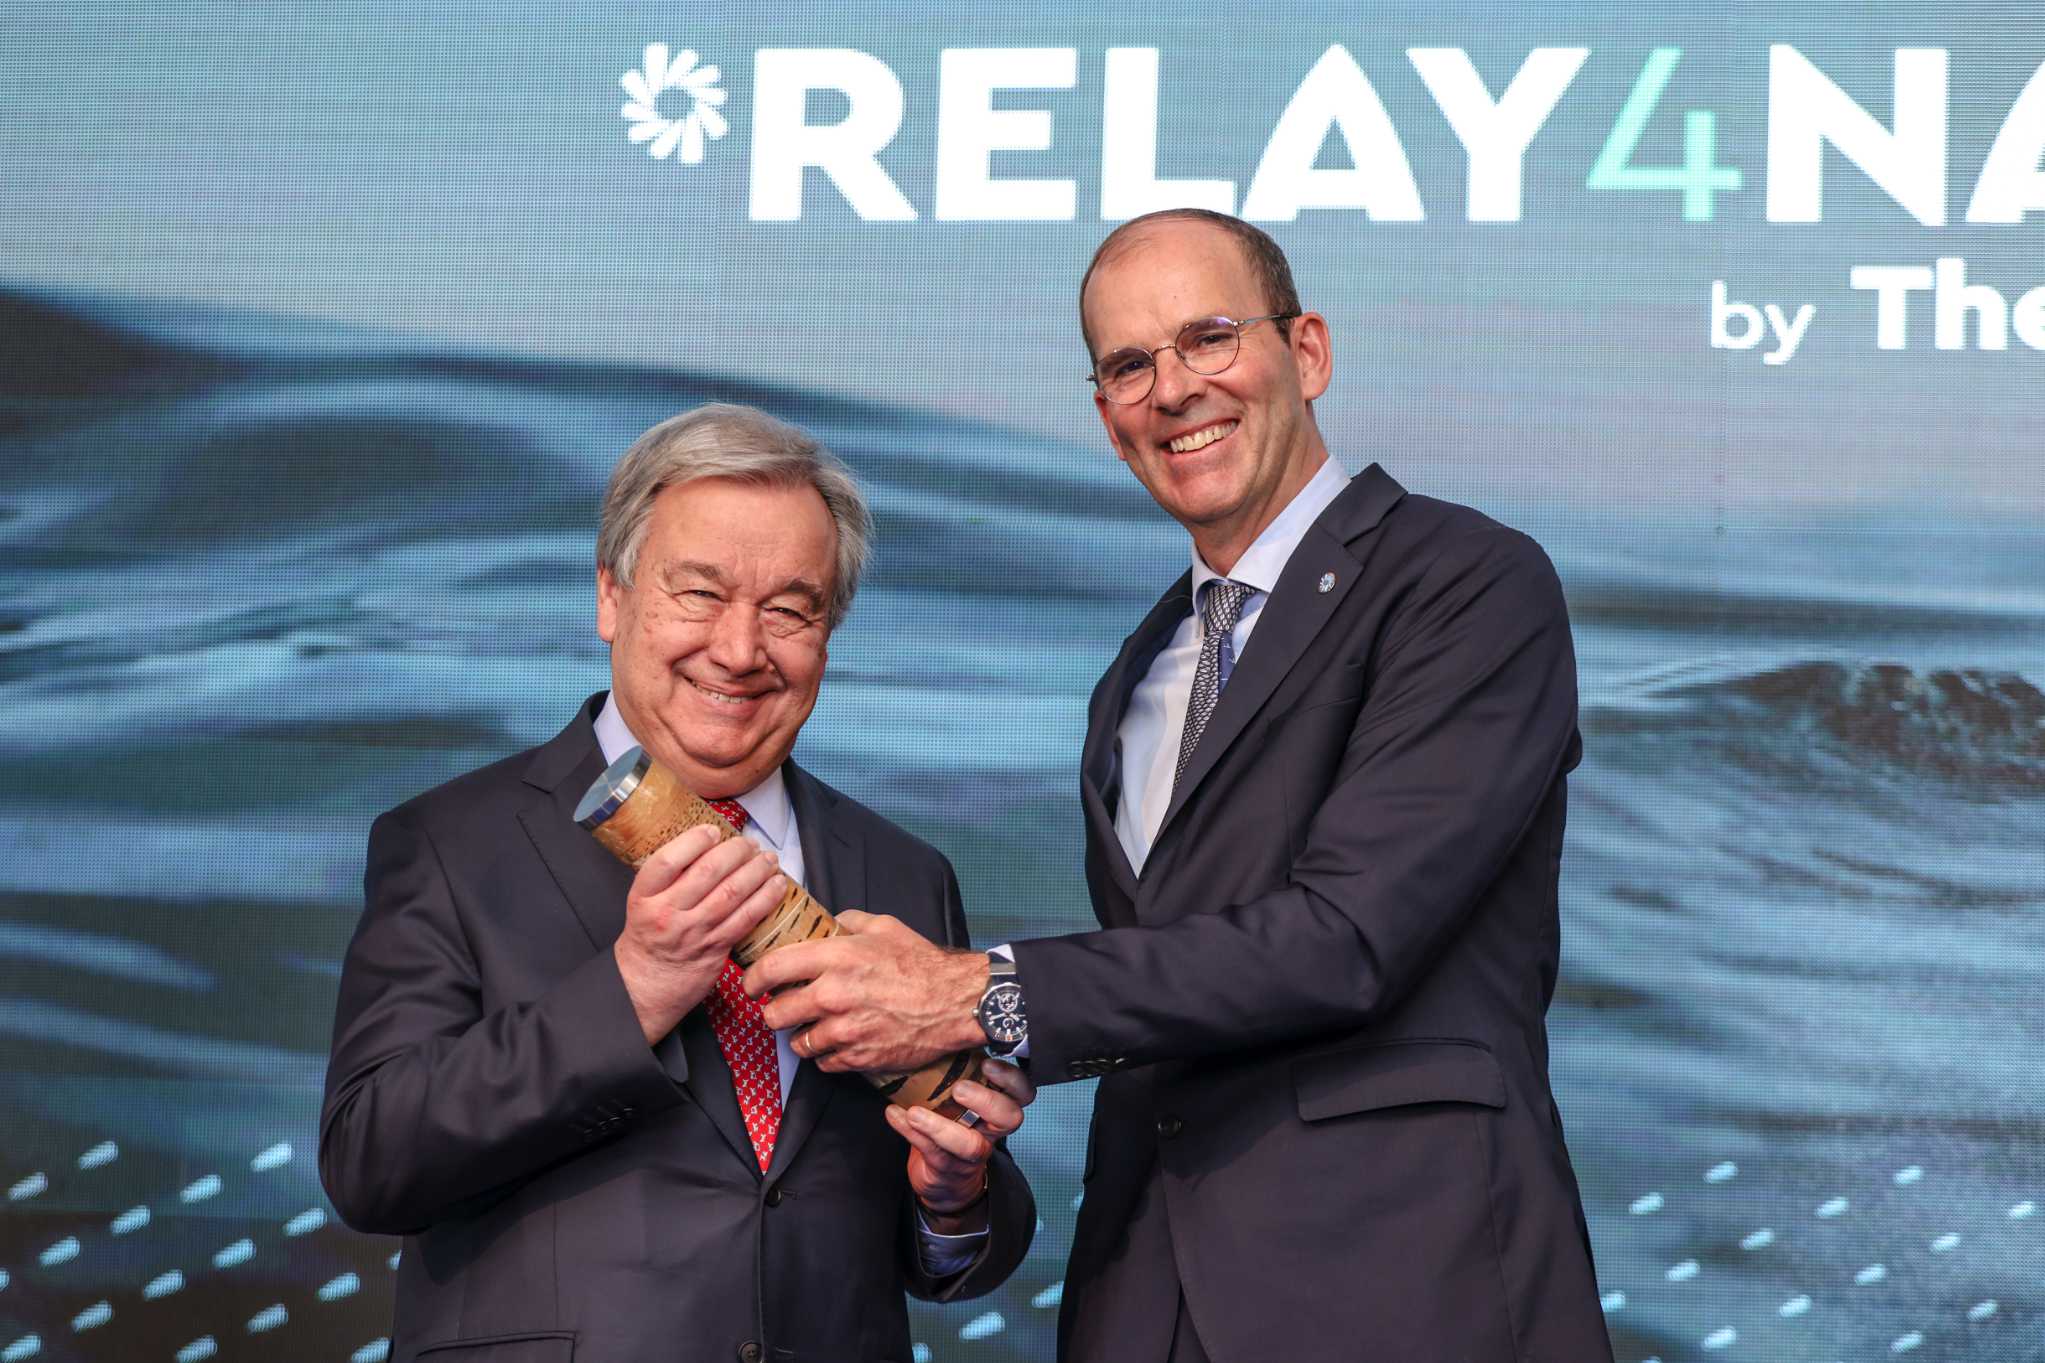 The Ocean Race 2022-23. 23 January 2023. UN Secretary-General António Guterres receives the Relay4Nature Baton at The Ocean Race Summit Cabo Verde© Sailing Energy / The Ocean Race